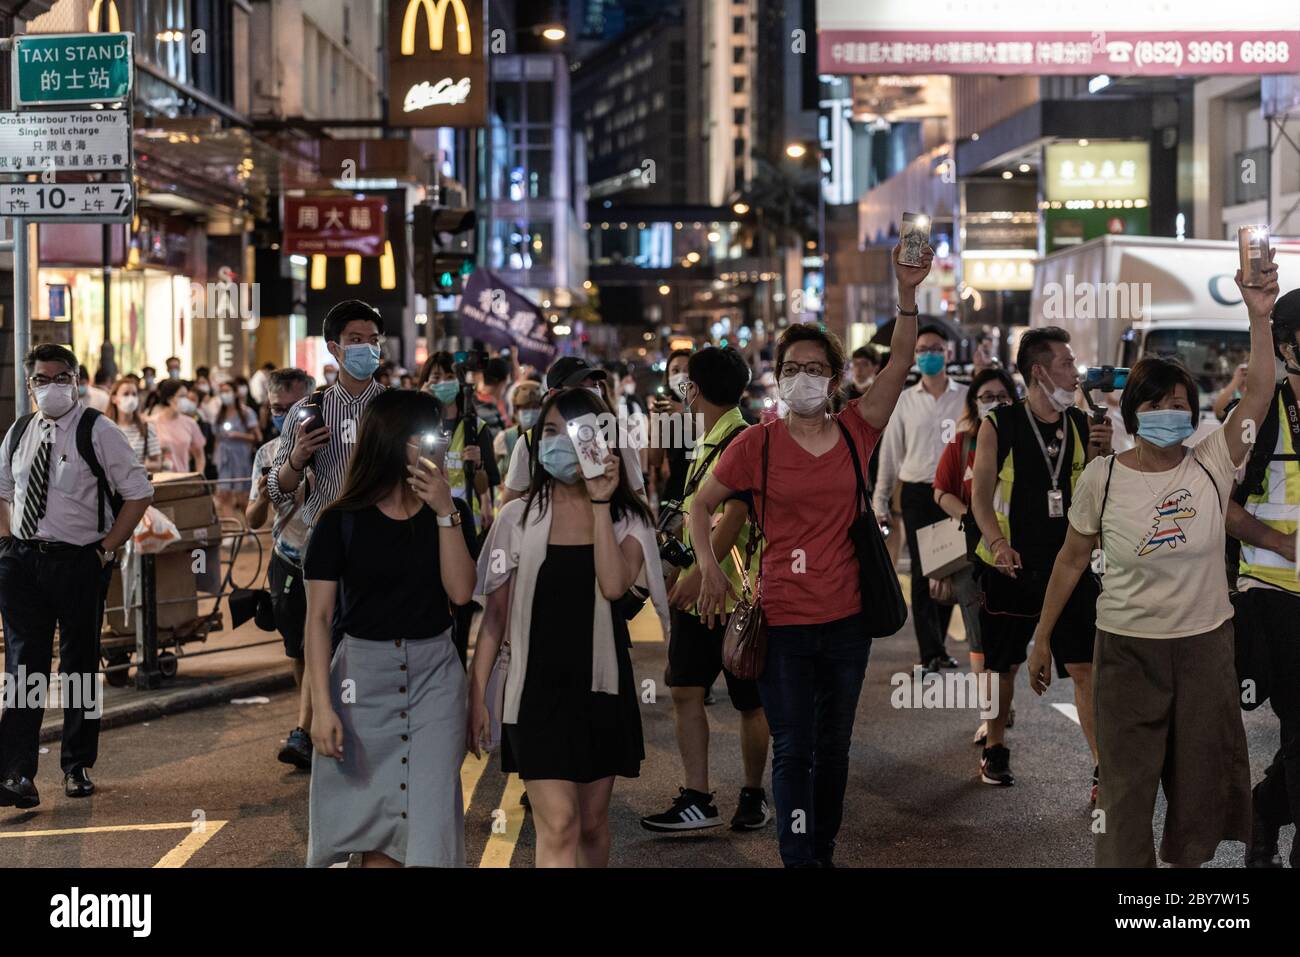 Hong Kong SAR, China. 9th June 2020. Hundreds of Hongkongers defy a police ban as they take over the streets in the Central business district to mark the one year anniversary of the Hong Kong pro-democracy protests. Credit: Ben Marans/Alamy Live News. Stock Photo